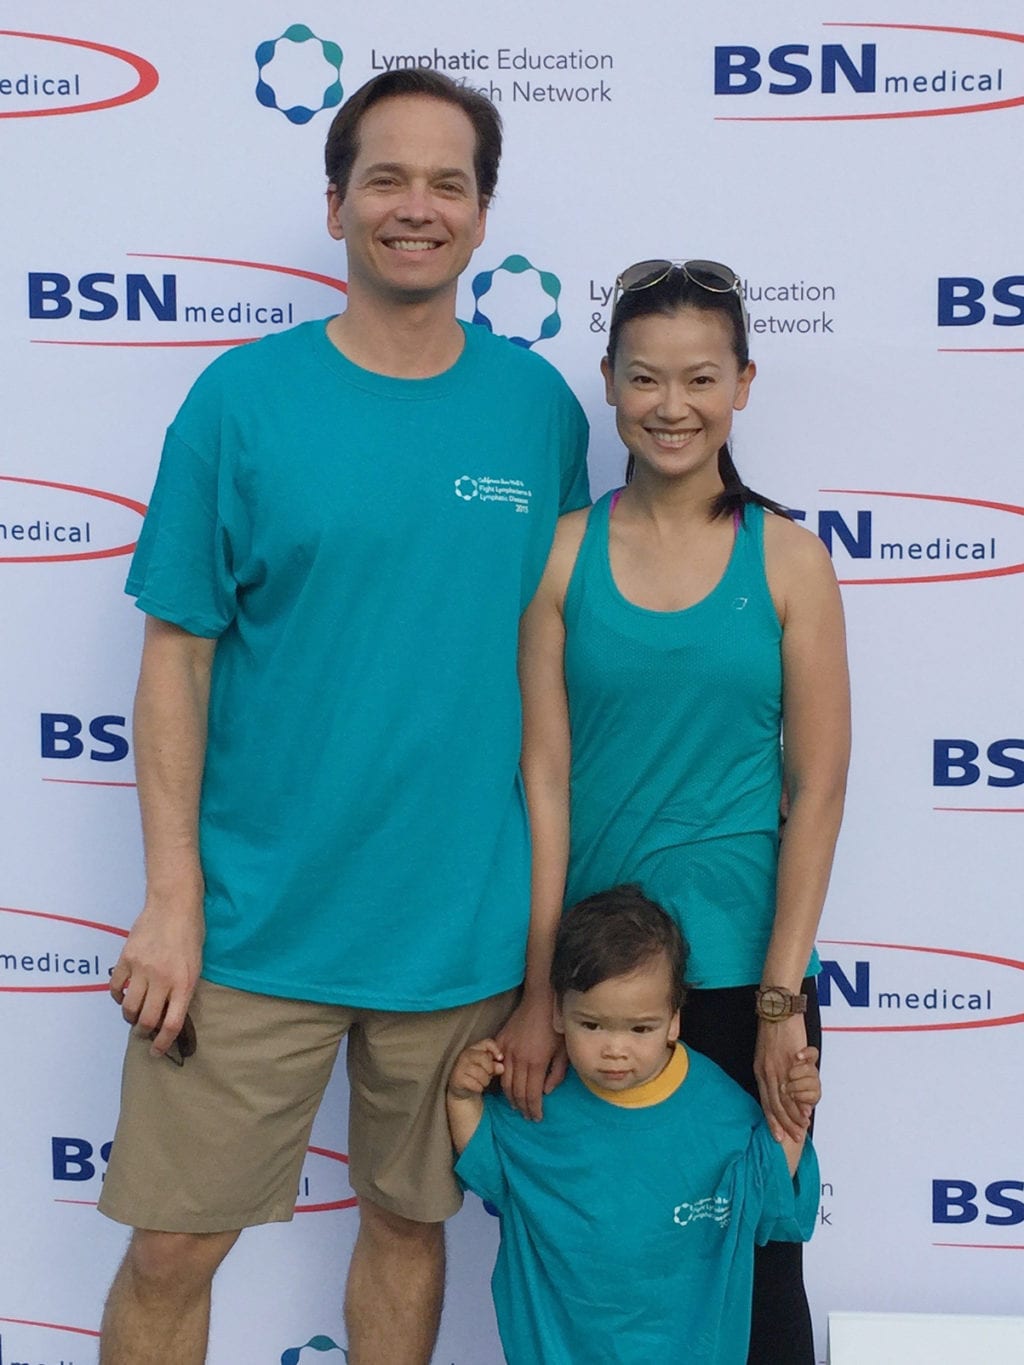 Dr. Jay Granzow, MD, and his family at the annual run/walk to Fight lymphedema and lymphatic diseases.